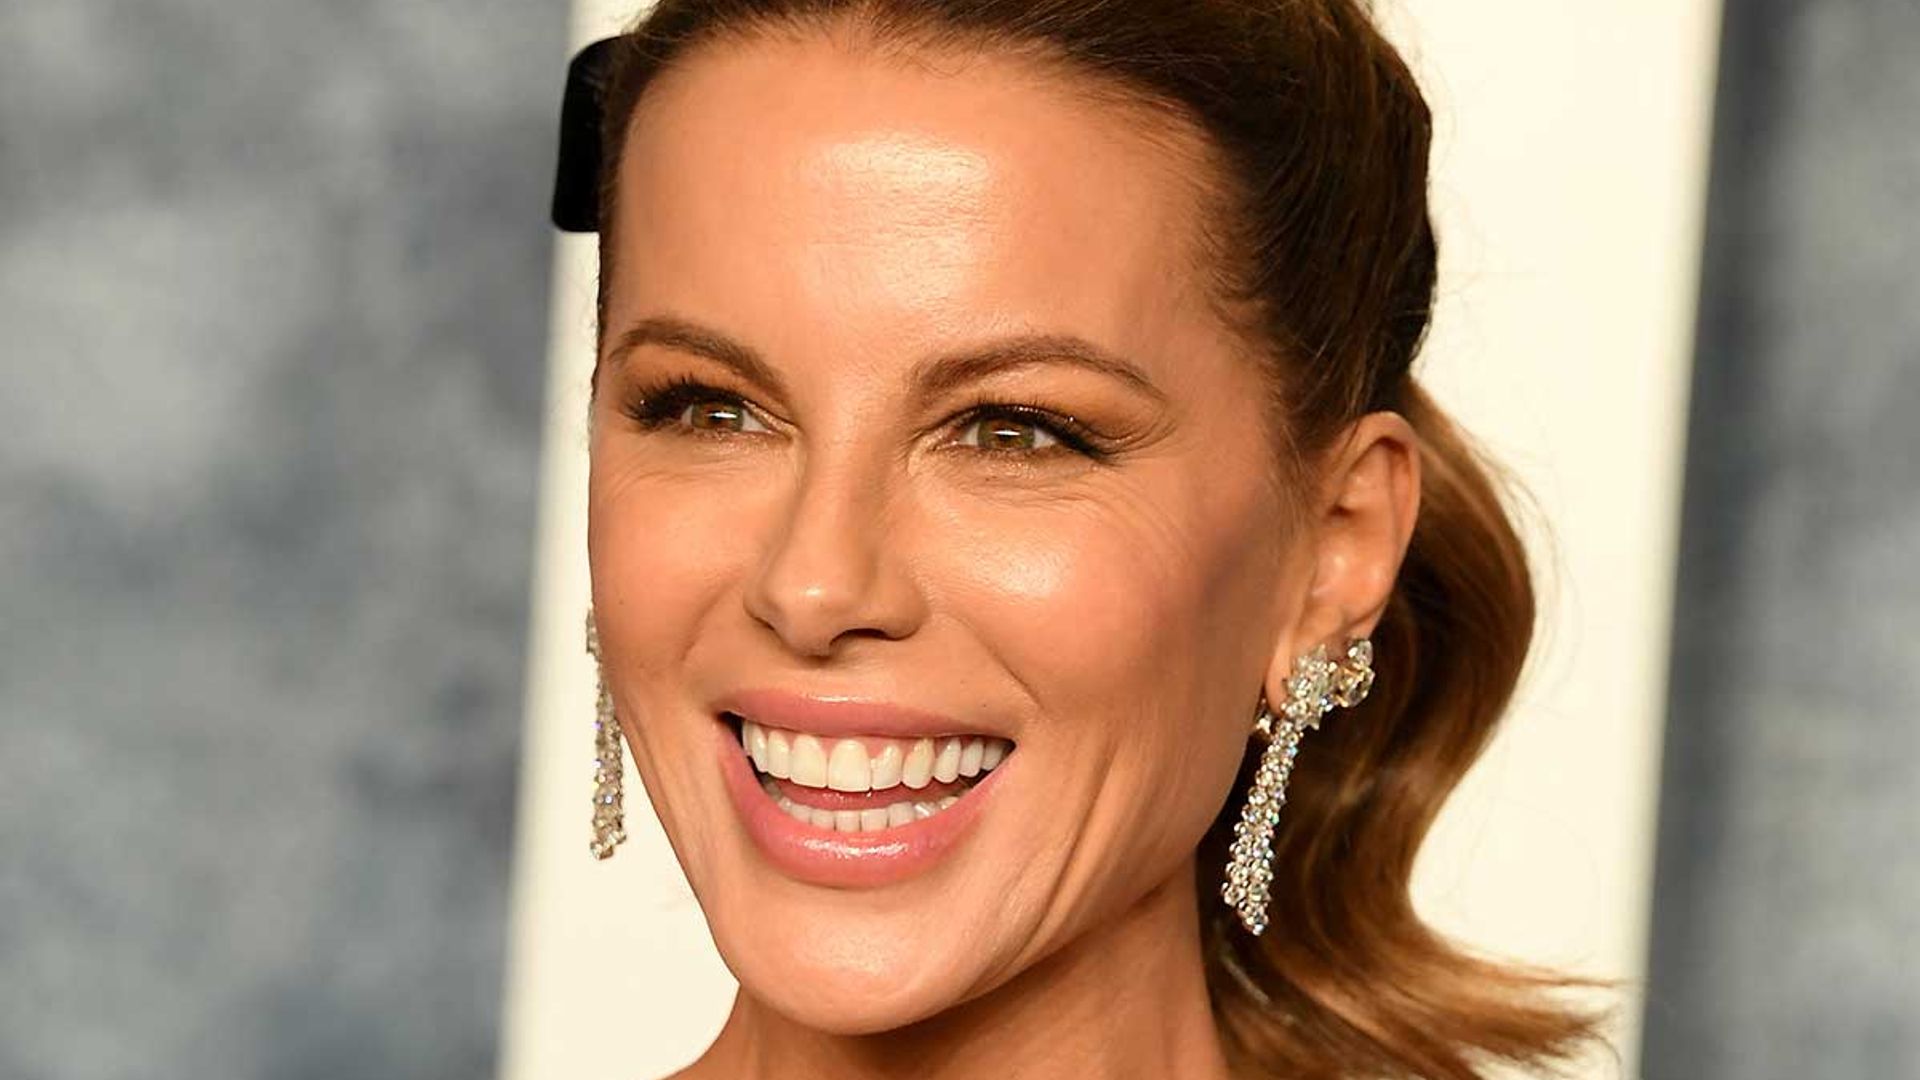 Kate Beckinsale poses alongside lookalike mom for tearjerking tribute – see pictures